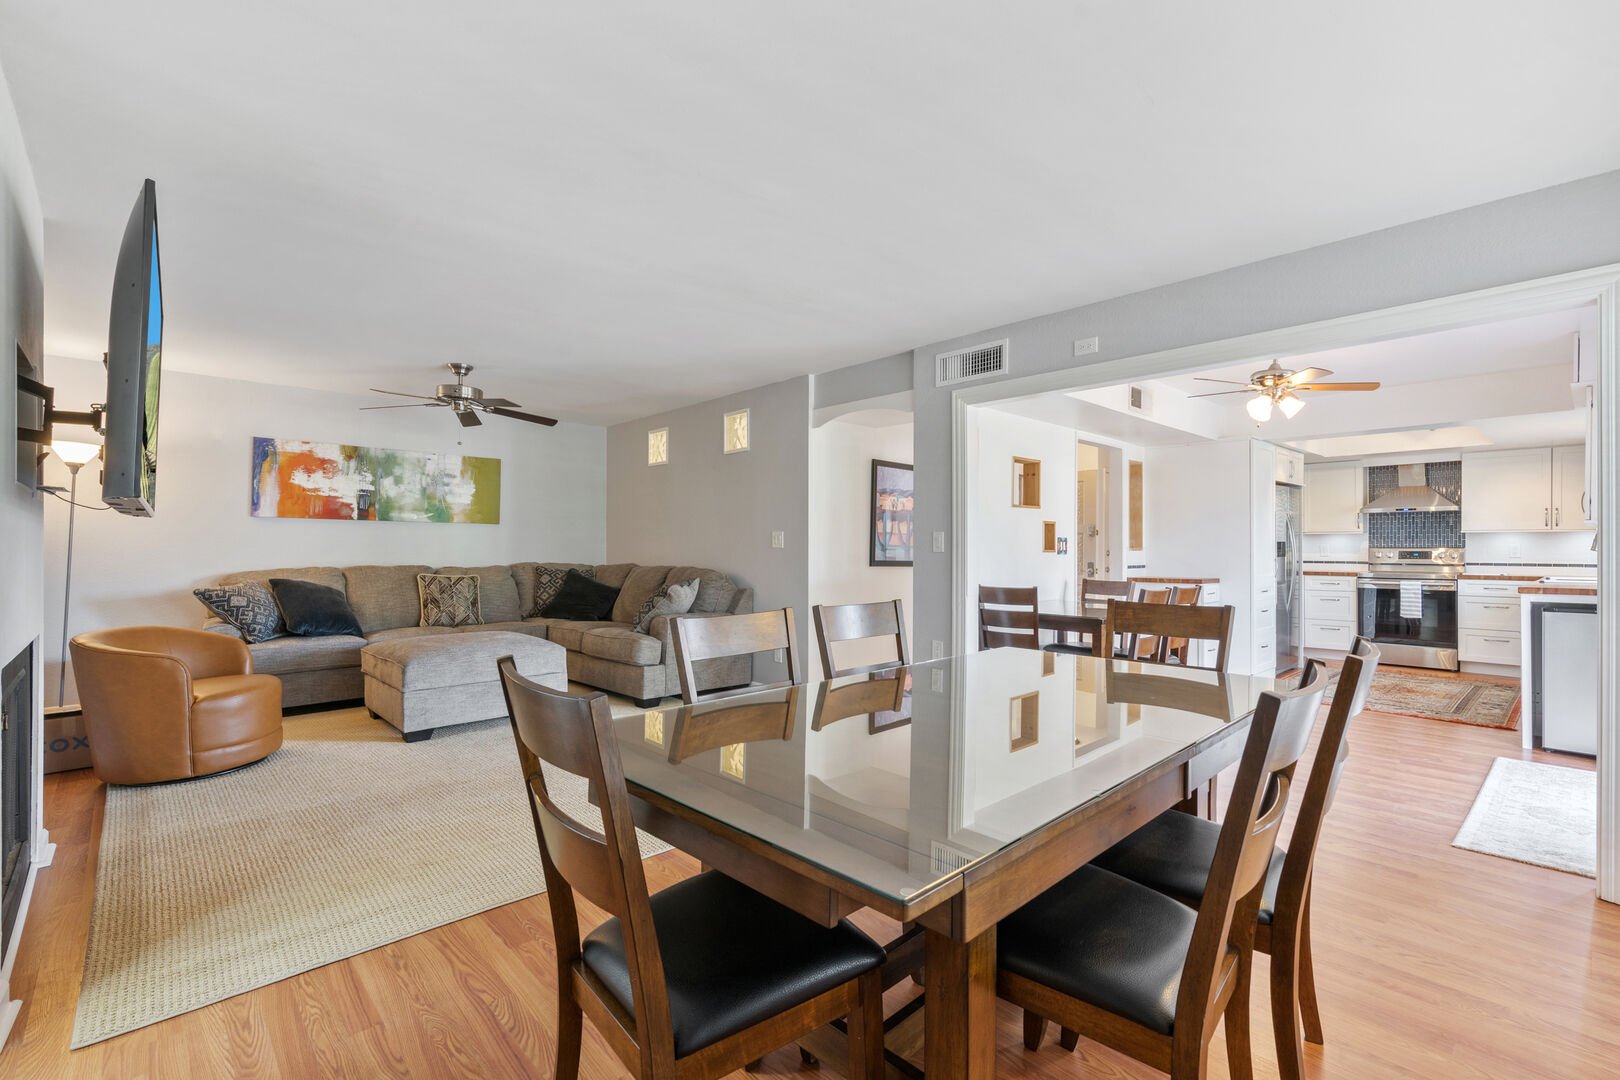 Relax in this open floorpan living space, with two indoor dining areas, and one outdoor.